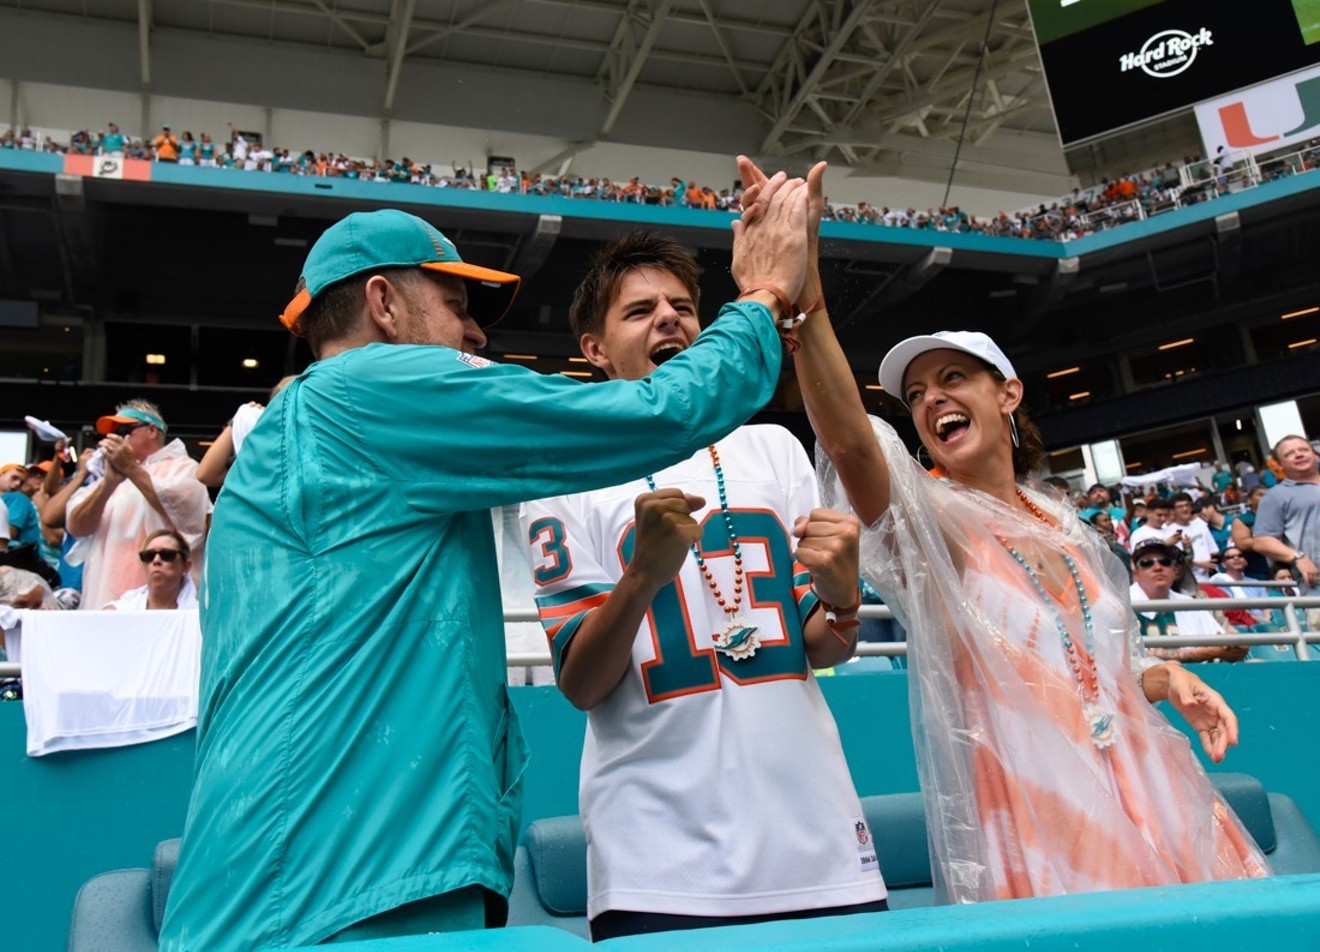 Miami Dolphins training camp starts this week in Davie.